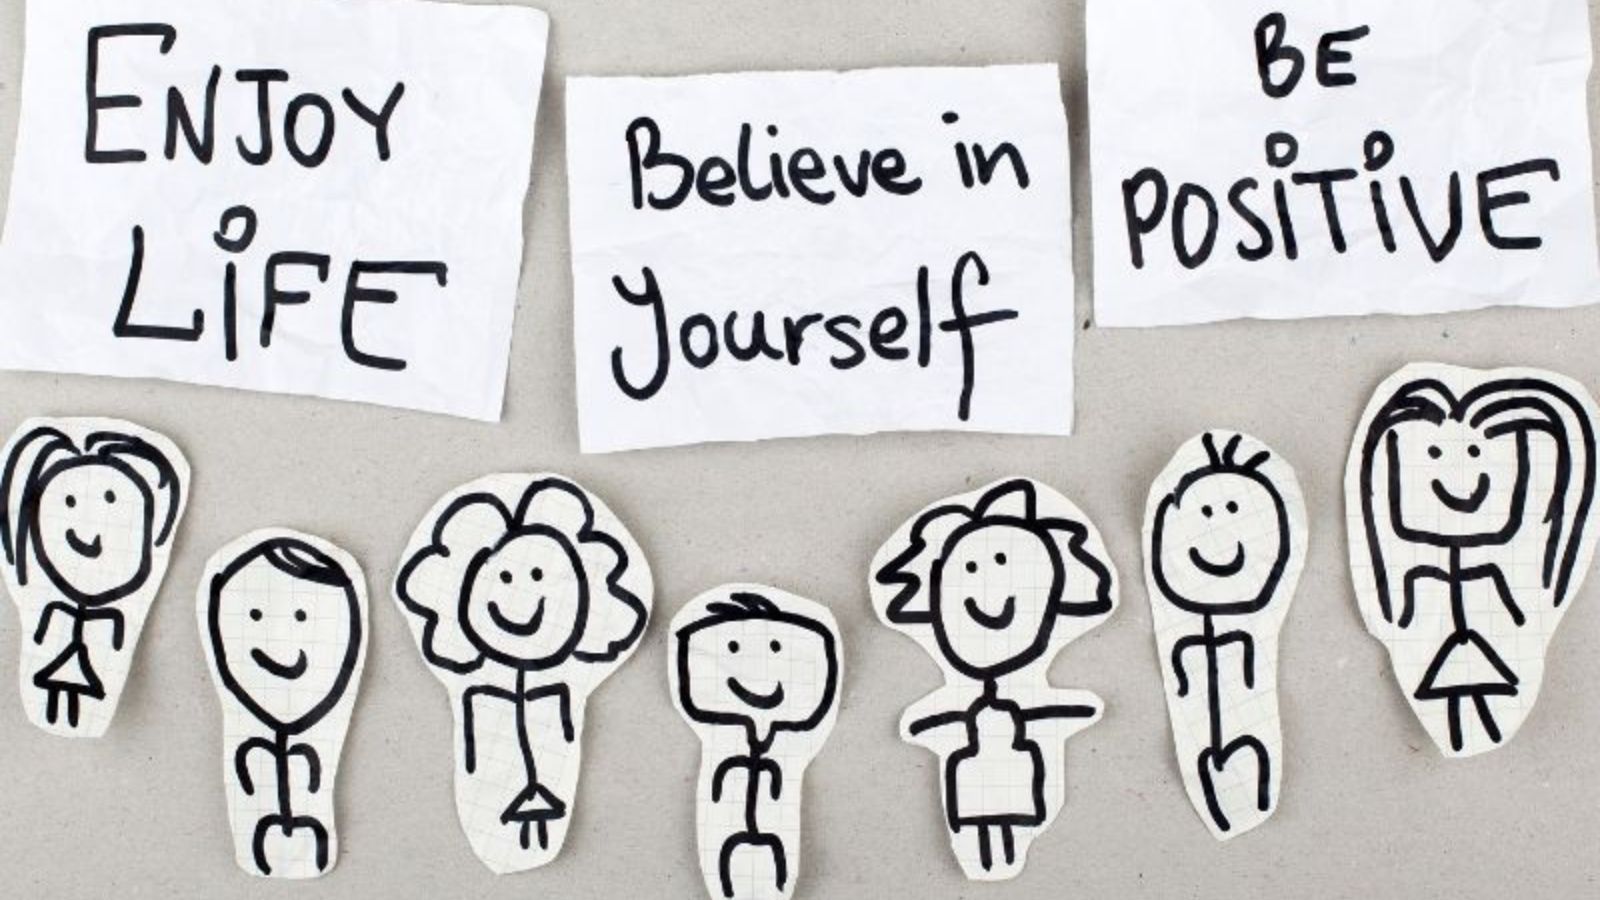 Enjoy life, believe in yourself, be positive - notes on white paper with stick figures underneath.